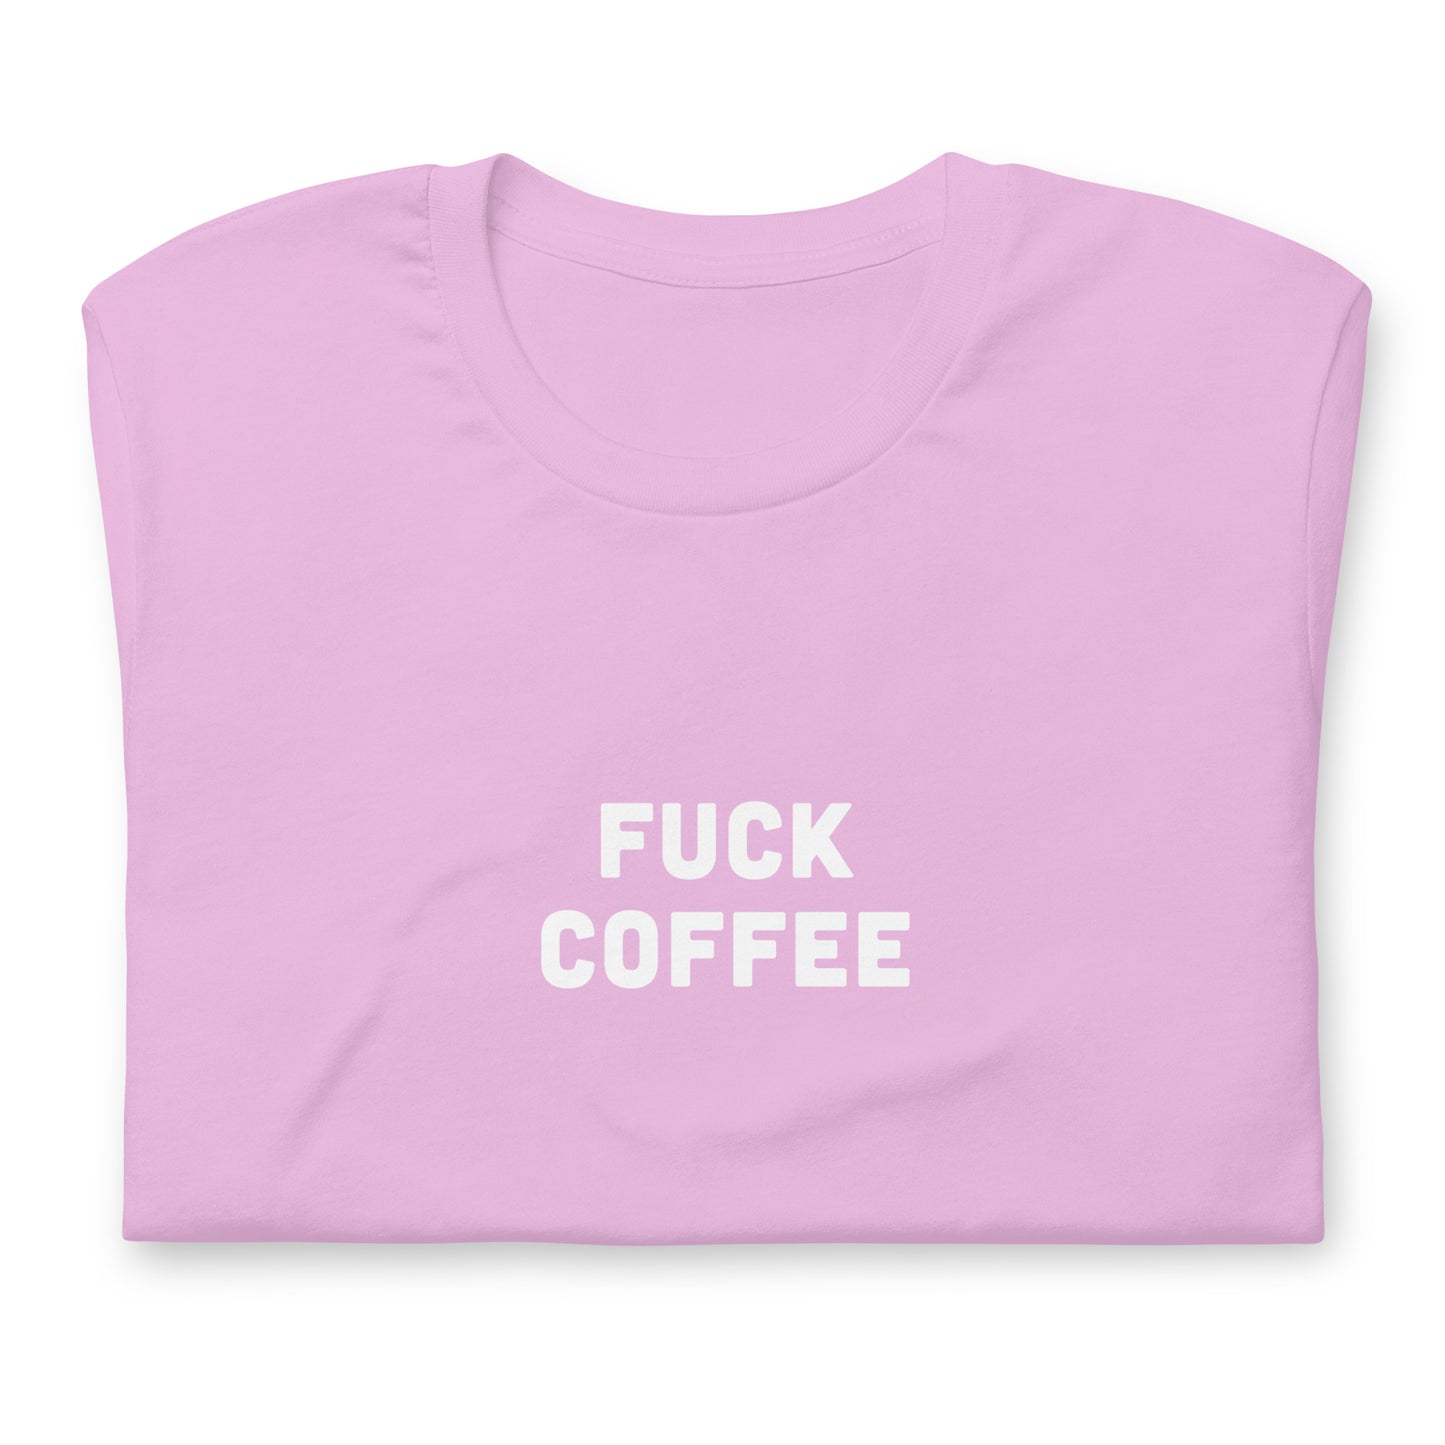 Fuck Coffee T-Shirt Size 2XL Color Forest